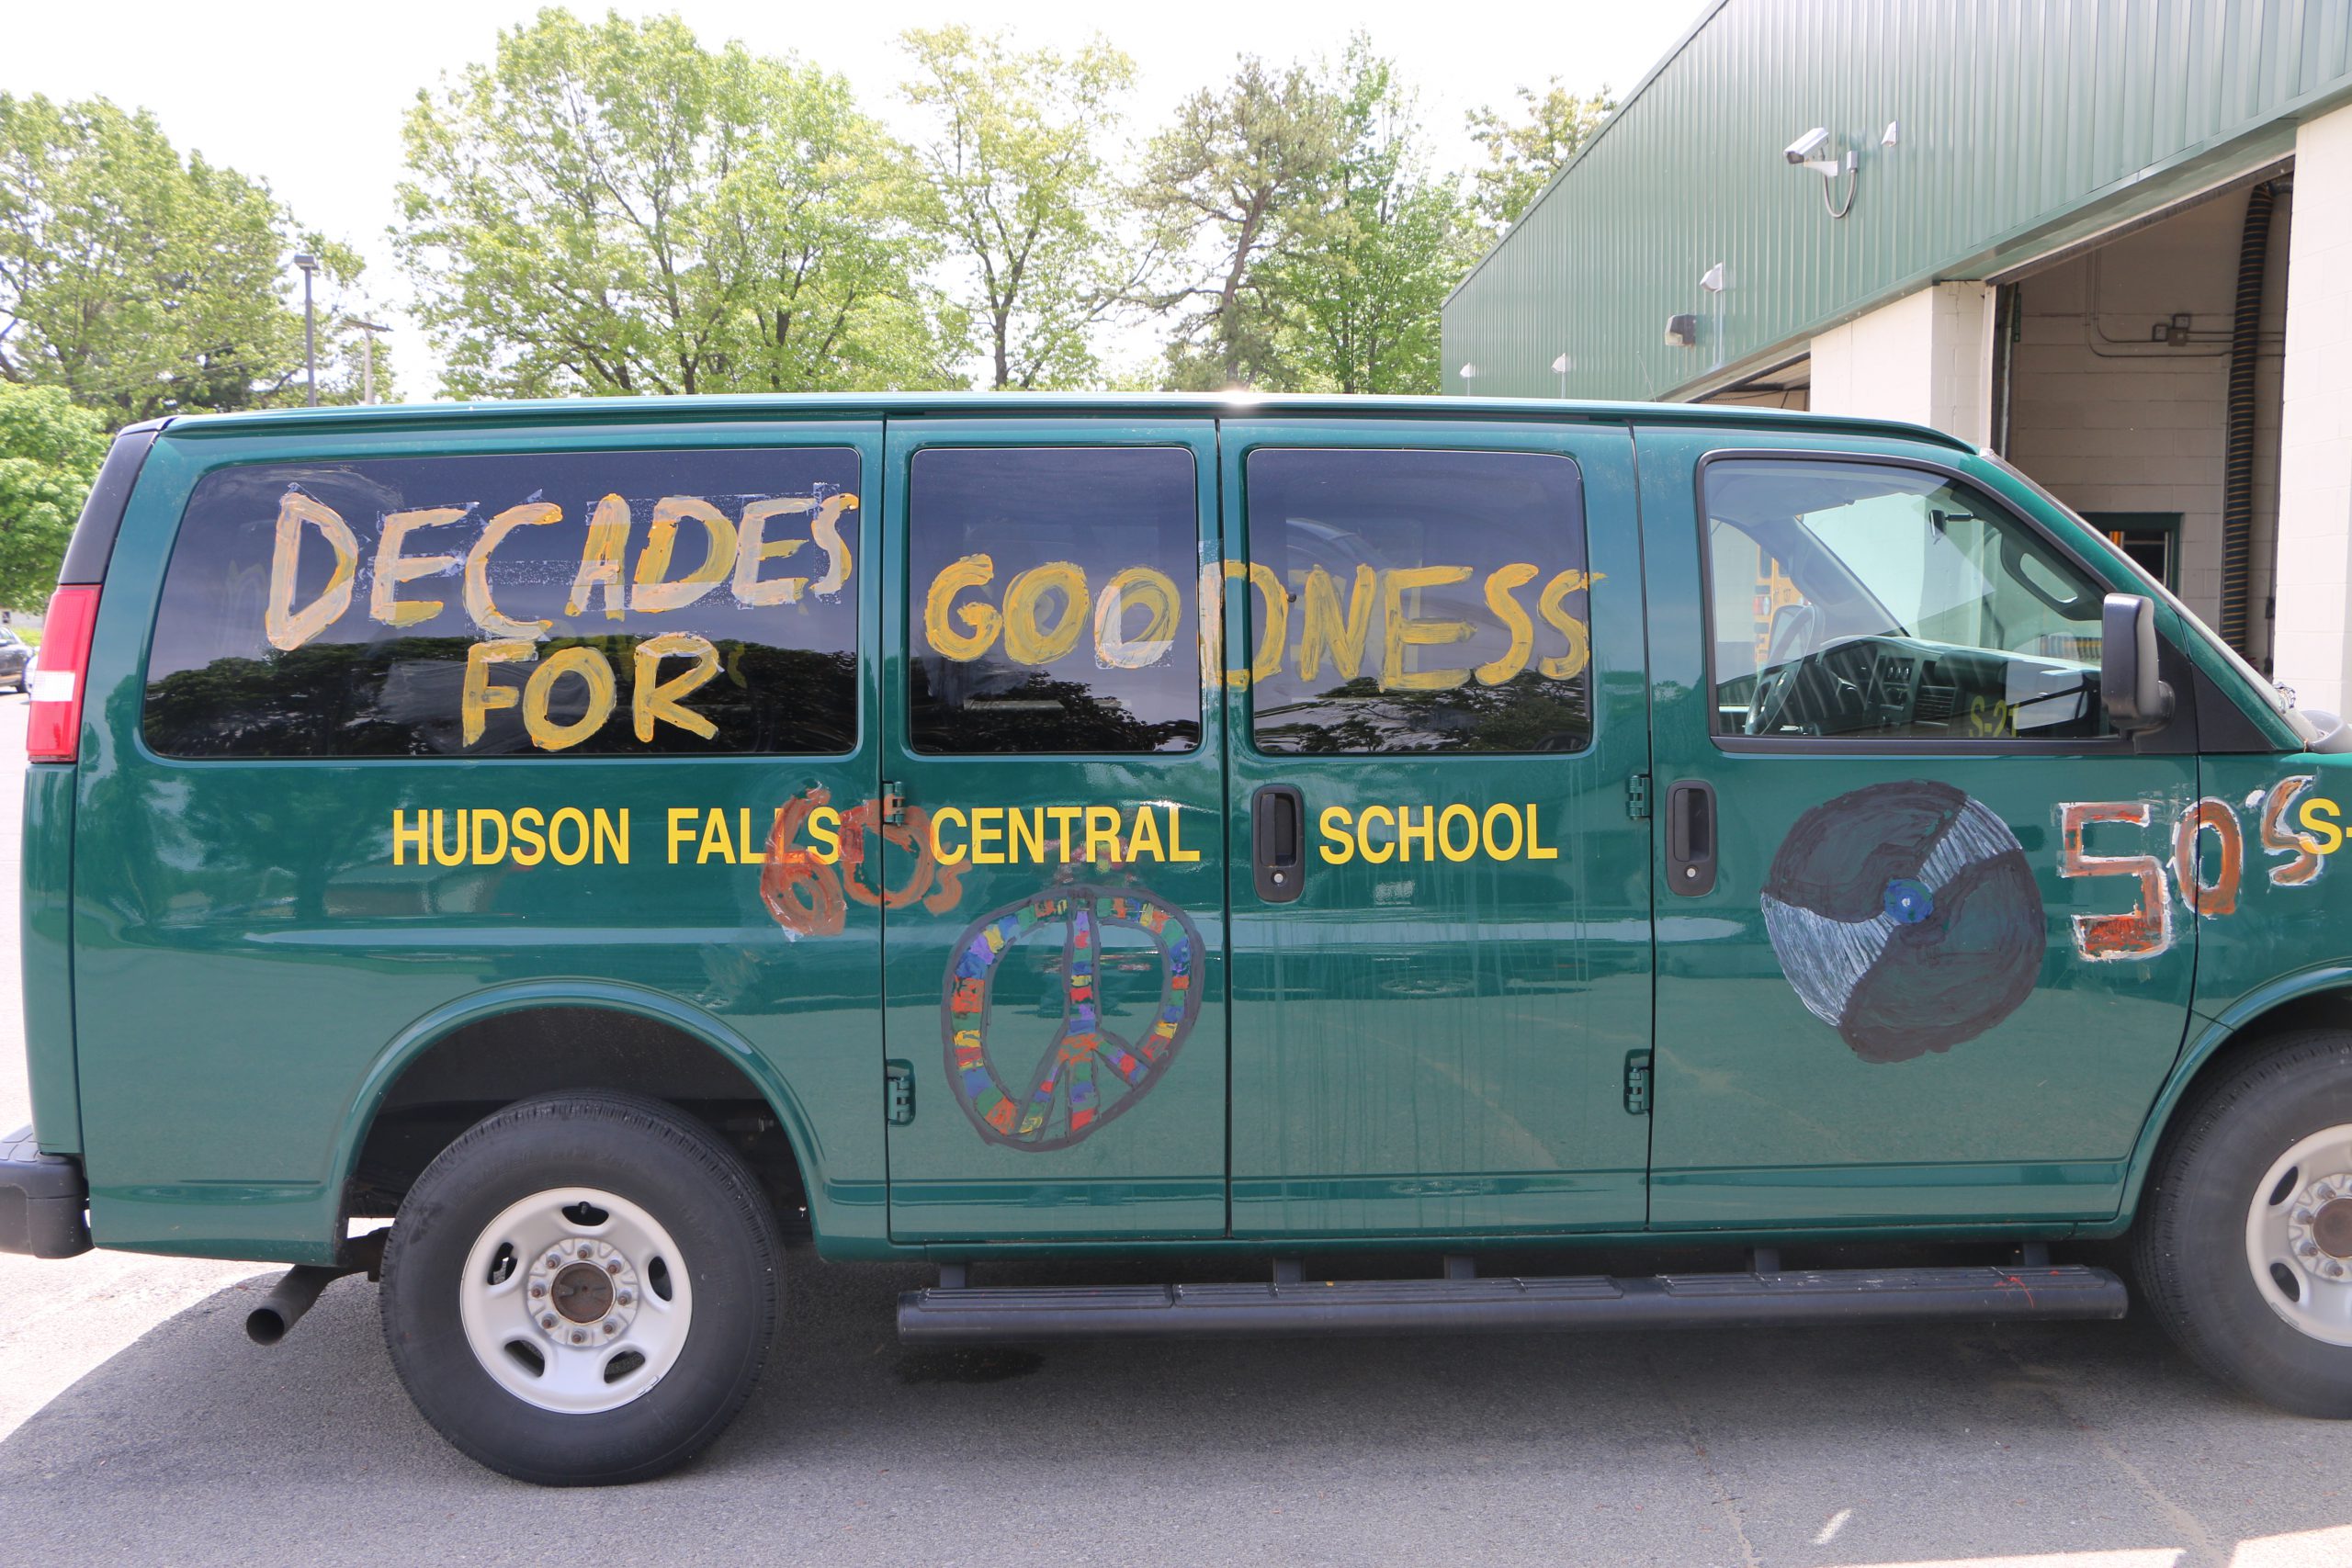 A Large van painted for Decades for Goodness